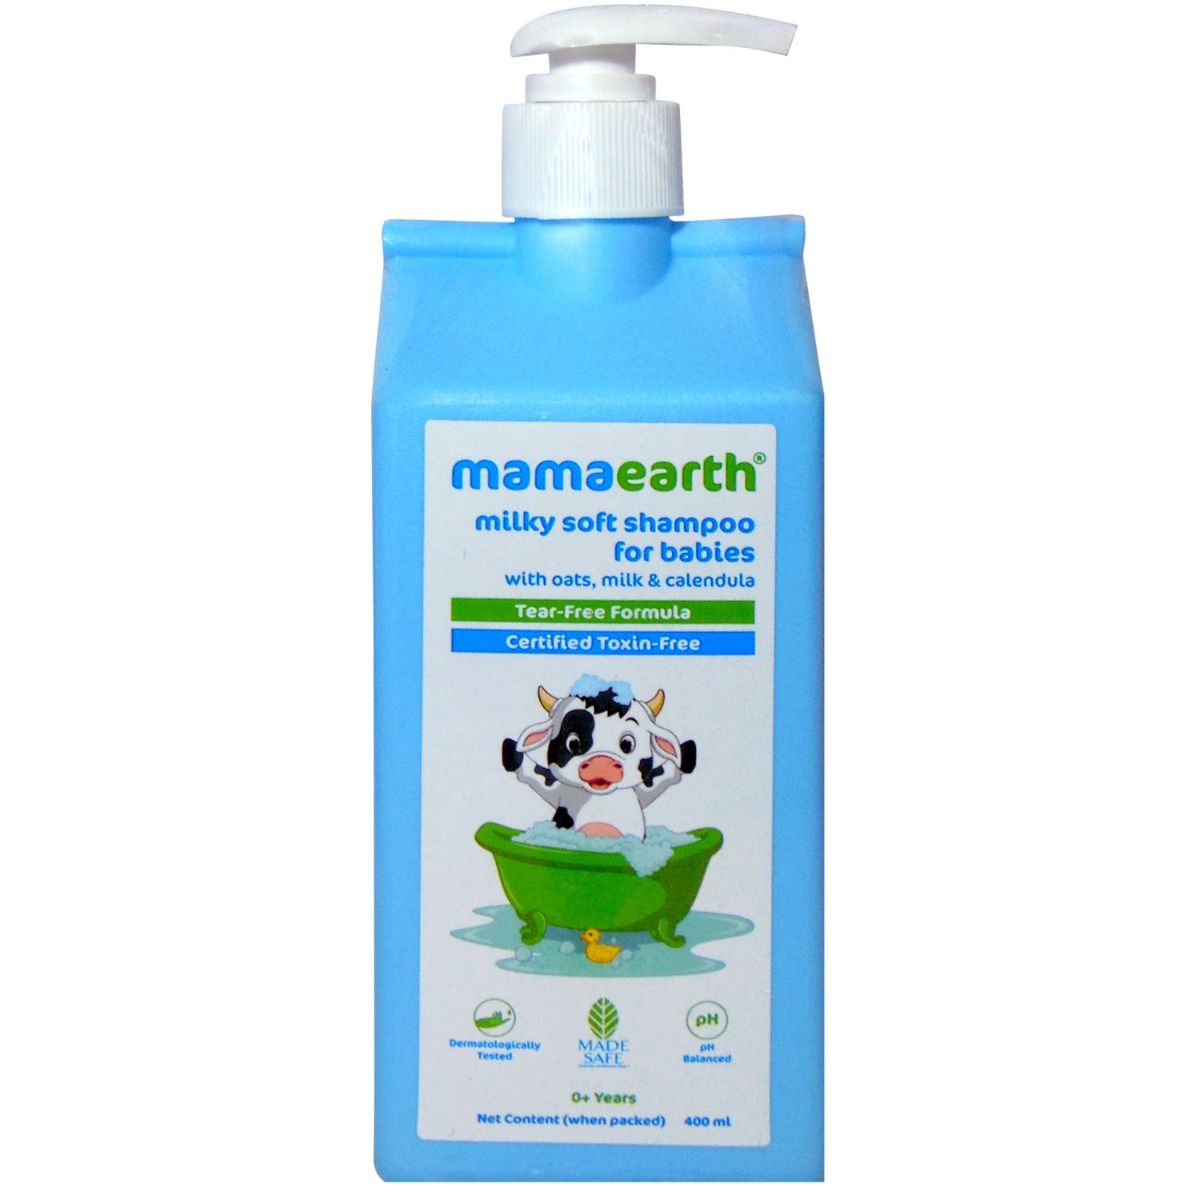 Buy Mamaearth Milky Soft Shampoo For Babies, 0-5Yrs, 400 ml Online